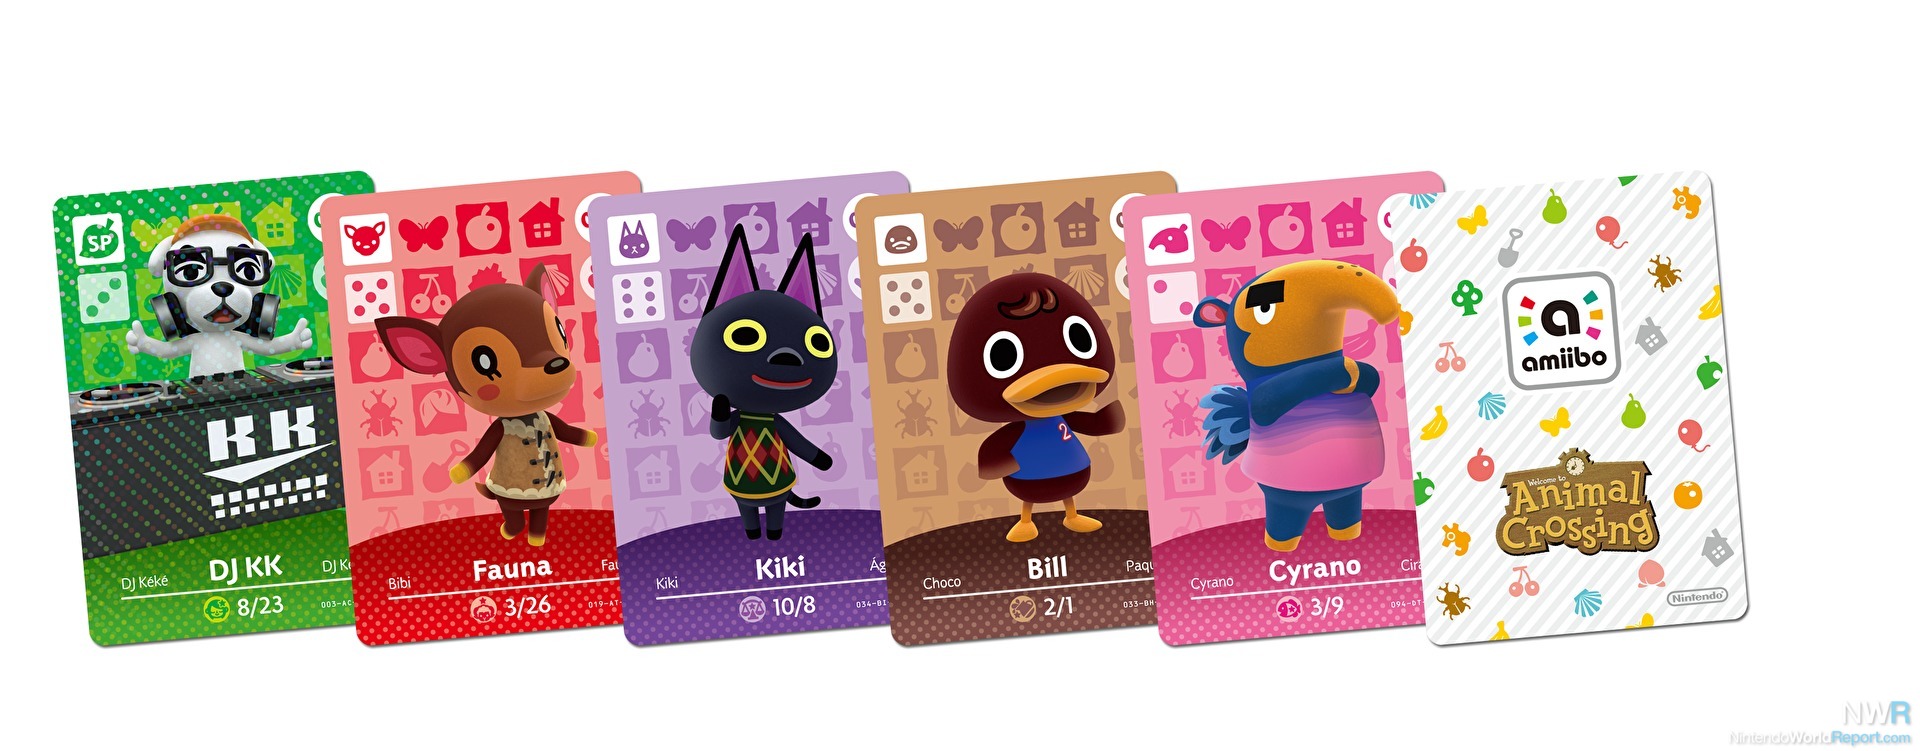 Five Things To Do With Your Animal Crossing amiibo Card Collection -  Feature - Nintendo World Report